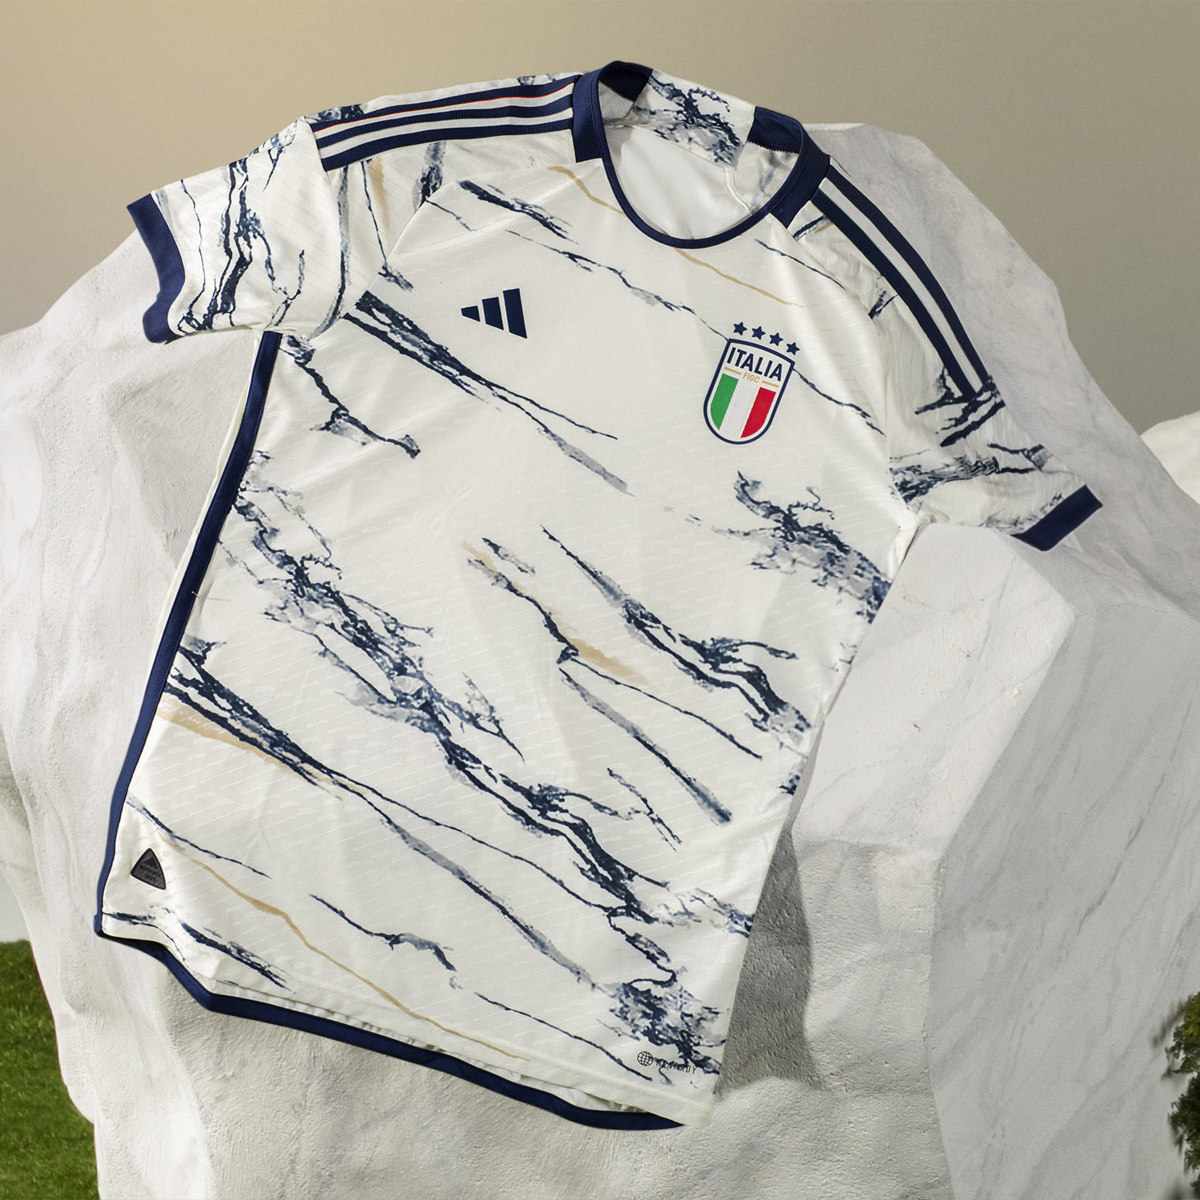 Adidas Italy 23 Away Authentic Jersey. 12